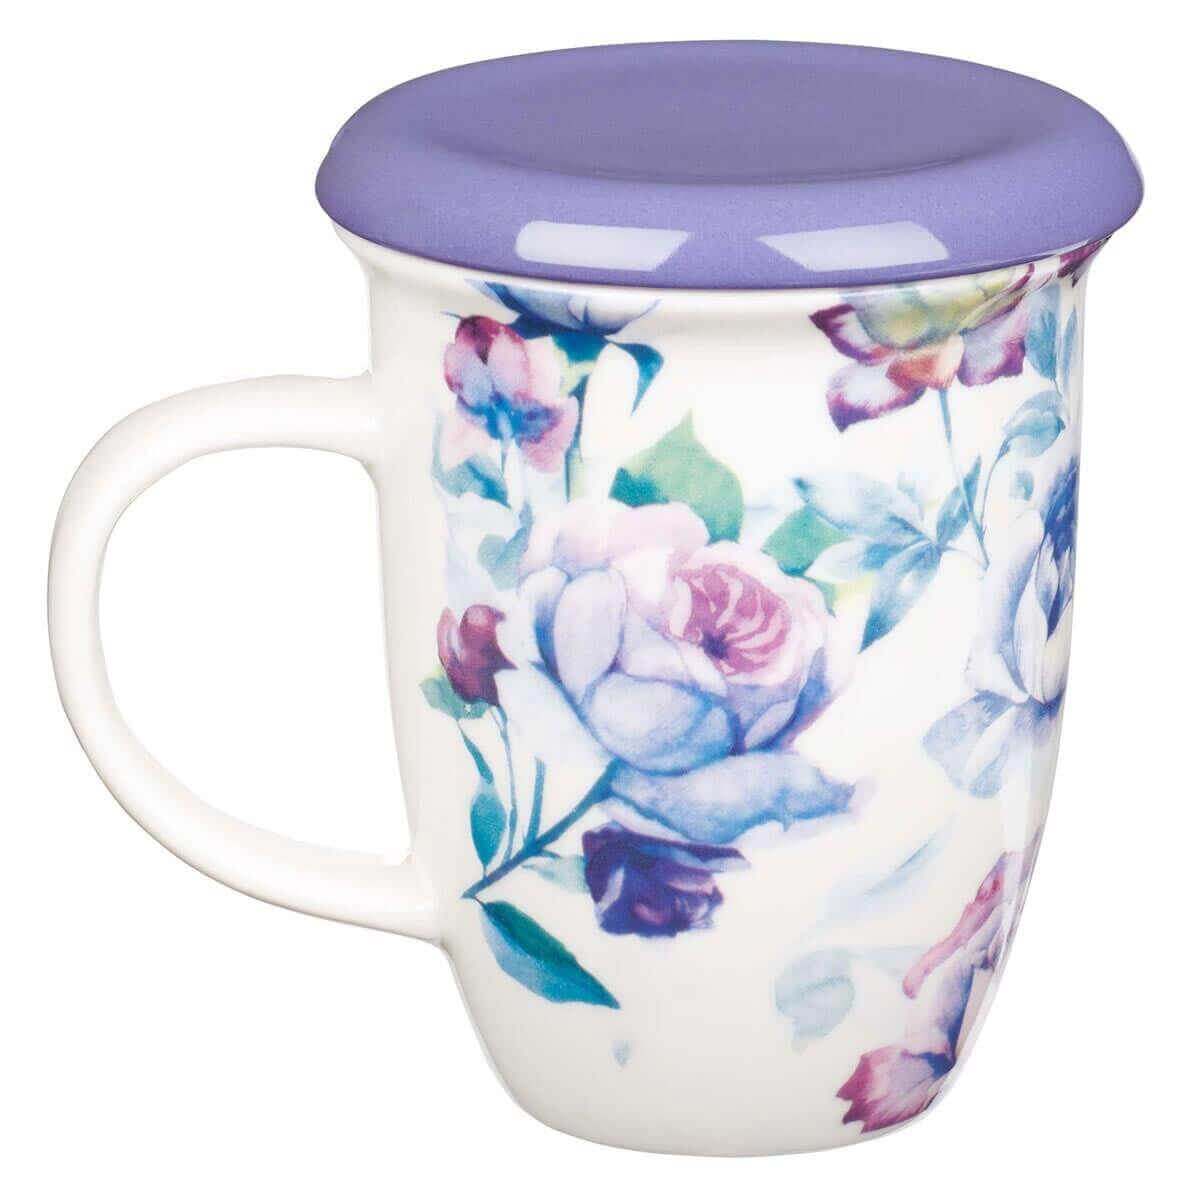 Be Still and Know Lidded Ceramic Mug in Purple - Psalm 46:10 | 2FruitBearers